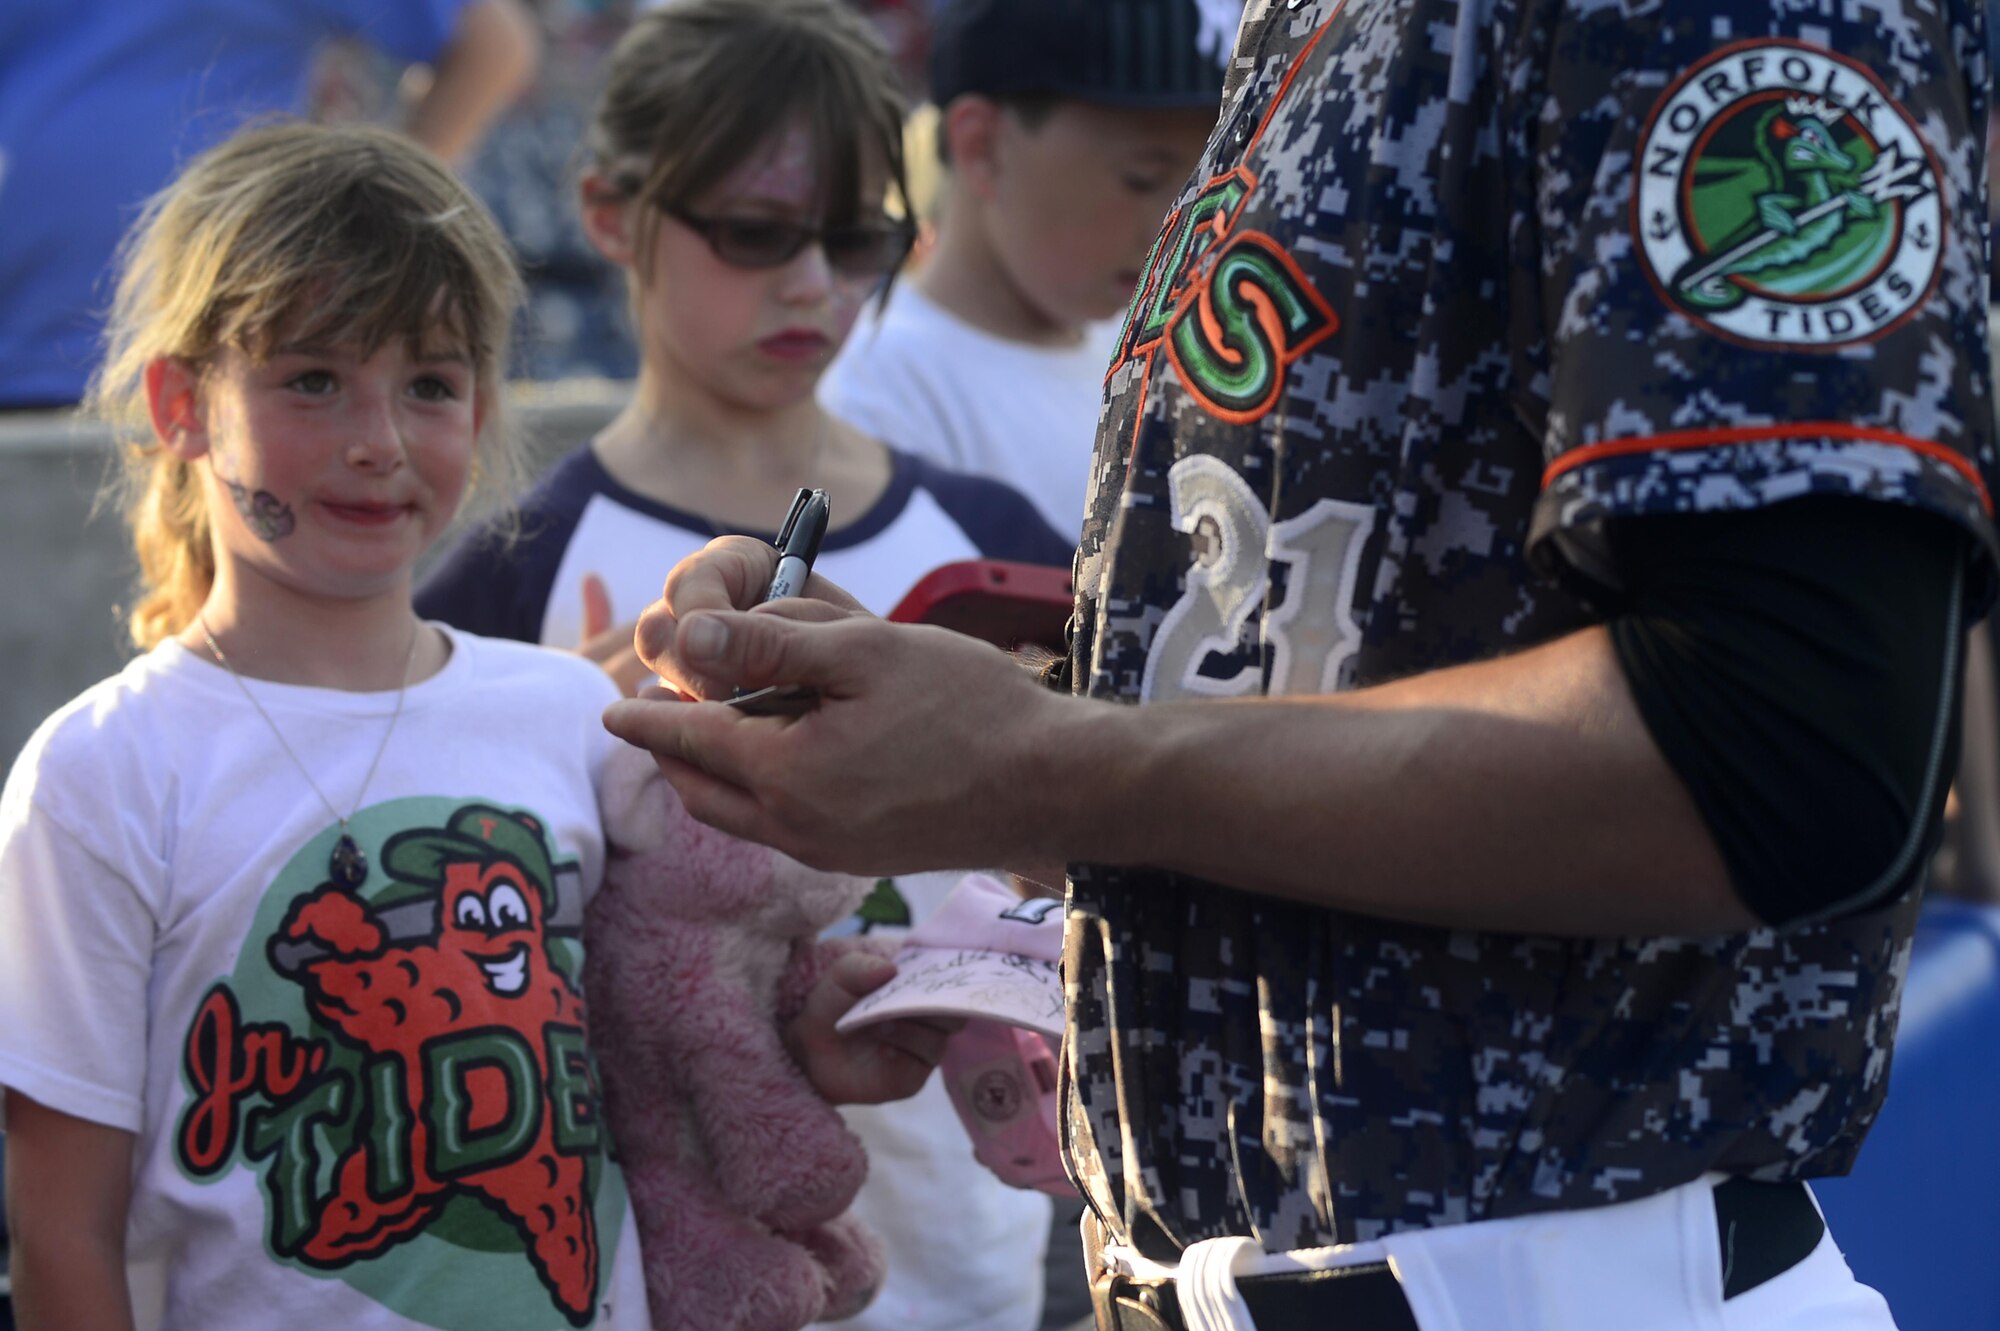 Trey Mancini, Norfolk Tides first baseman, signs autographs for children before the start of the Norfolk Tides Air Force Appreciation Night baseball game in Norfolk, Va., July 23, 2016. Fans were provided a chance to take pictures, receive autographs and meet the players before the start of the game. (U.S. Air Force photo by Airman 1st Class Kaylee Dubois)